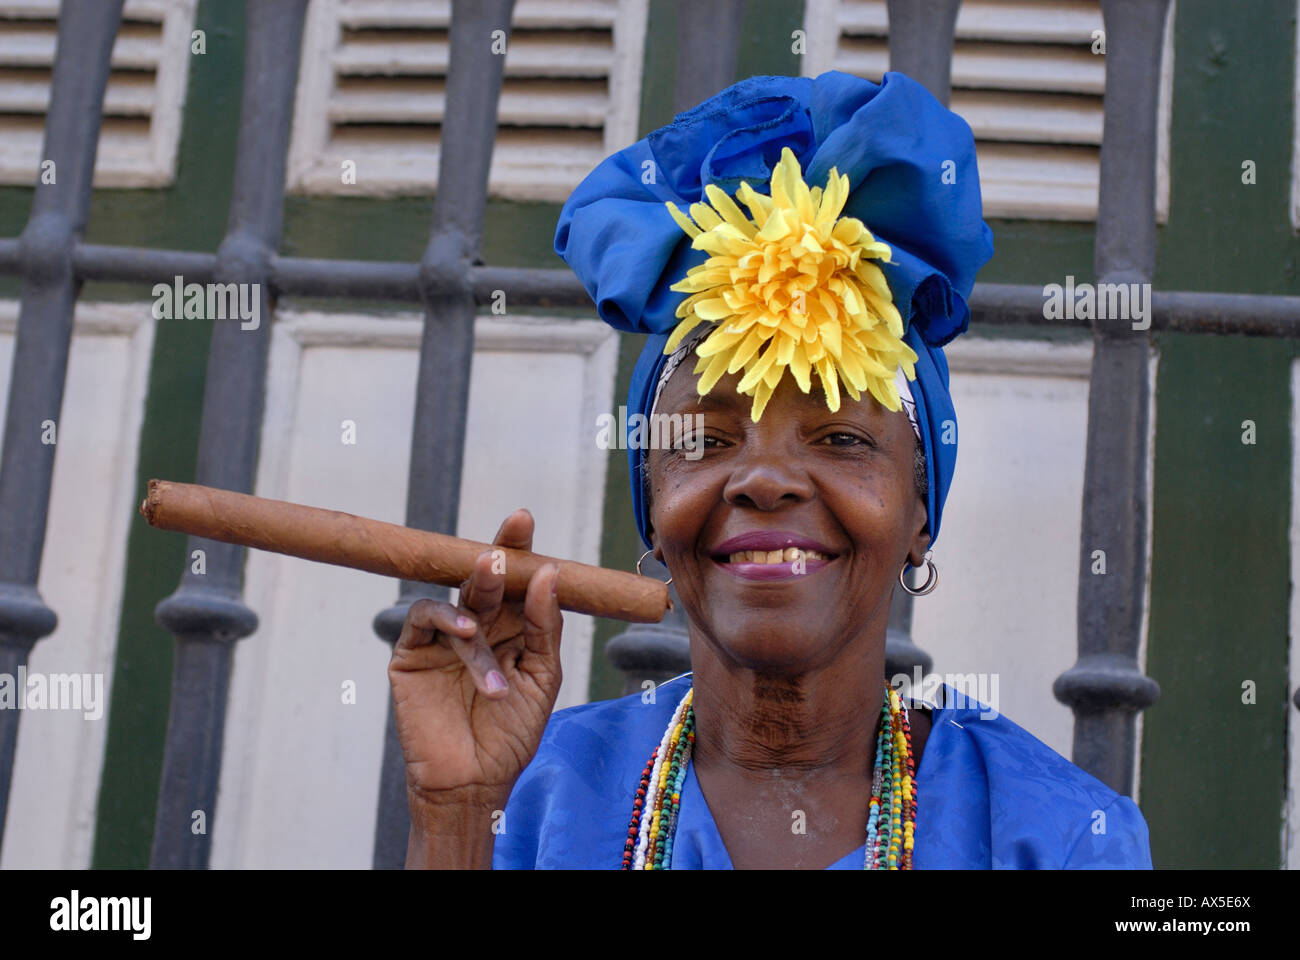 Woman wearing traditional clothes holding a cigar, Havana, Cuba Stock Photo